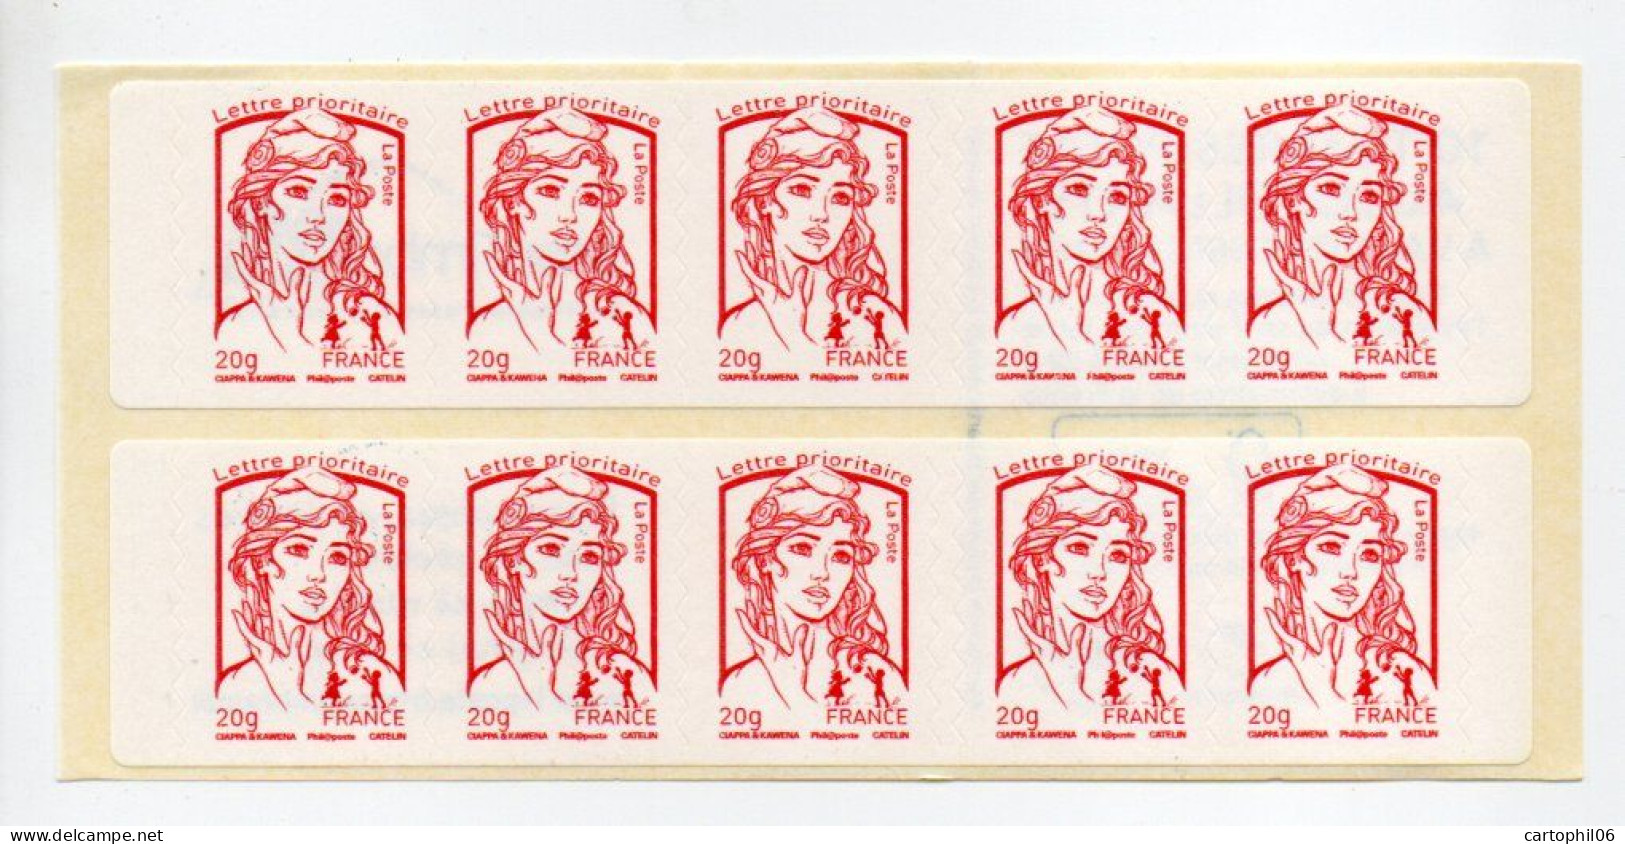 - FRANCE Carnet 10 Timbres Prioritaires Marianne De Ciappa - MON TIMBRAMOI - VALEUR FACIALE 14,30 € - - Moderne : 1959-...